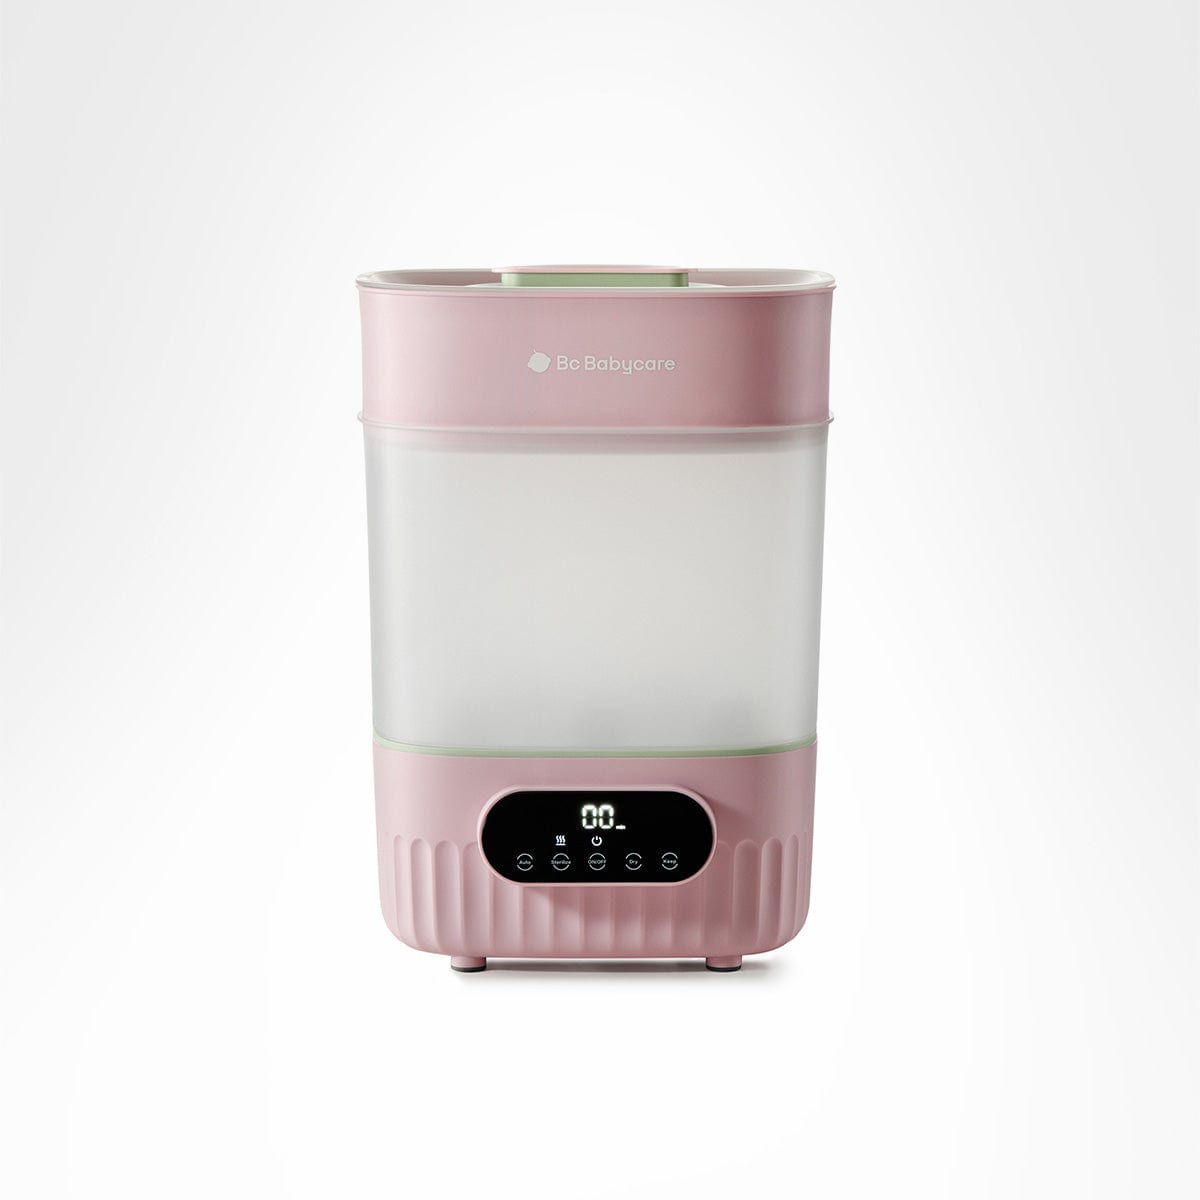 2 in 1 electric steam sterilizer – Baby Care and Mother